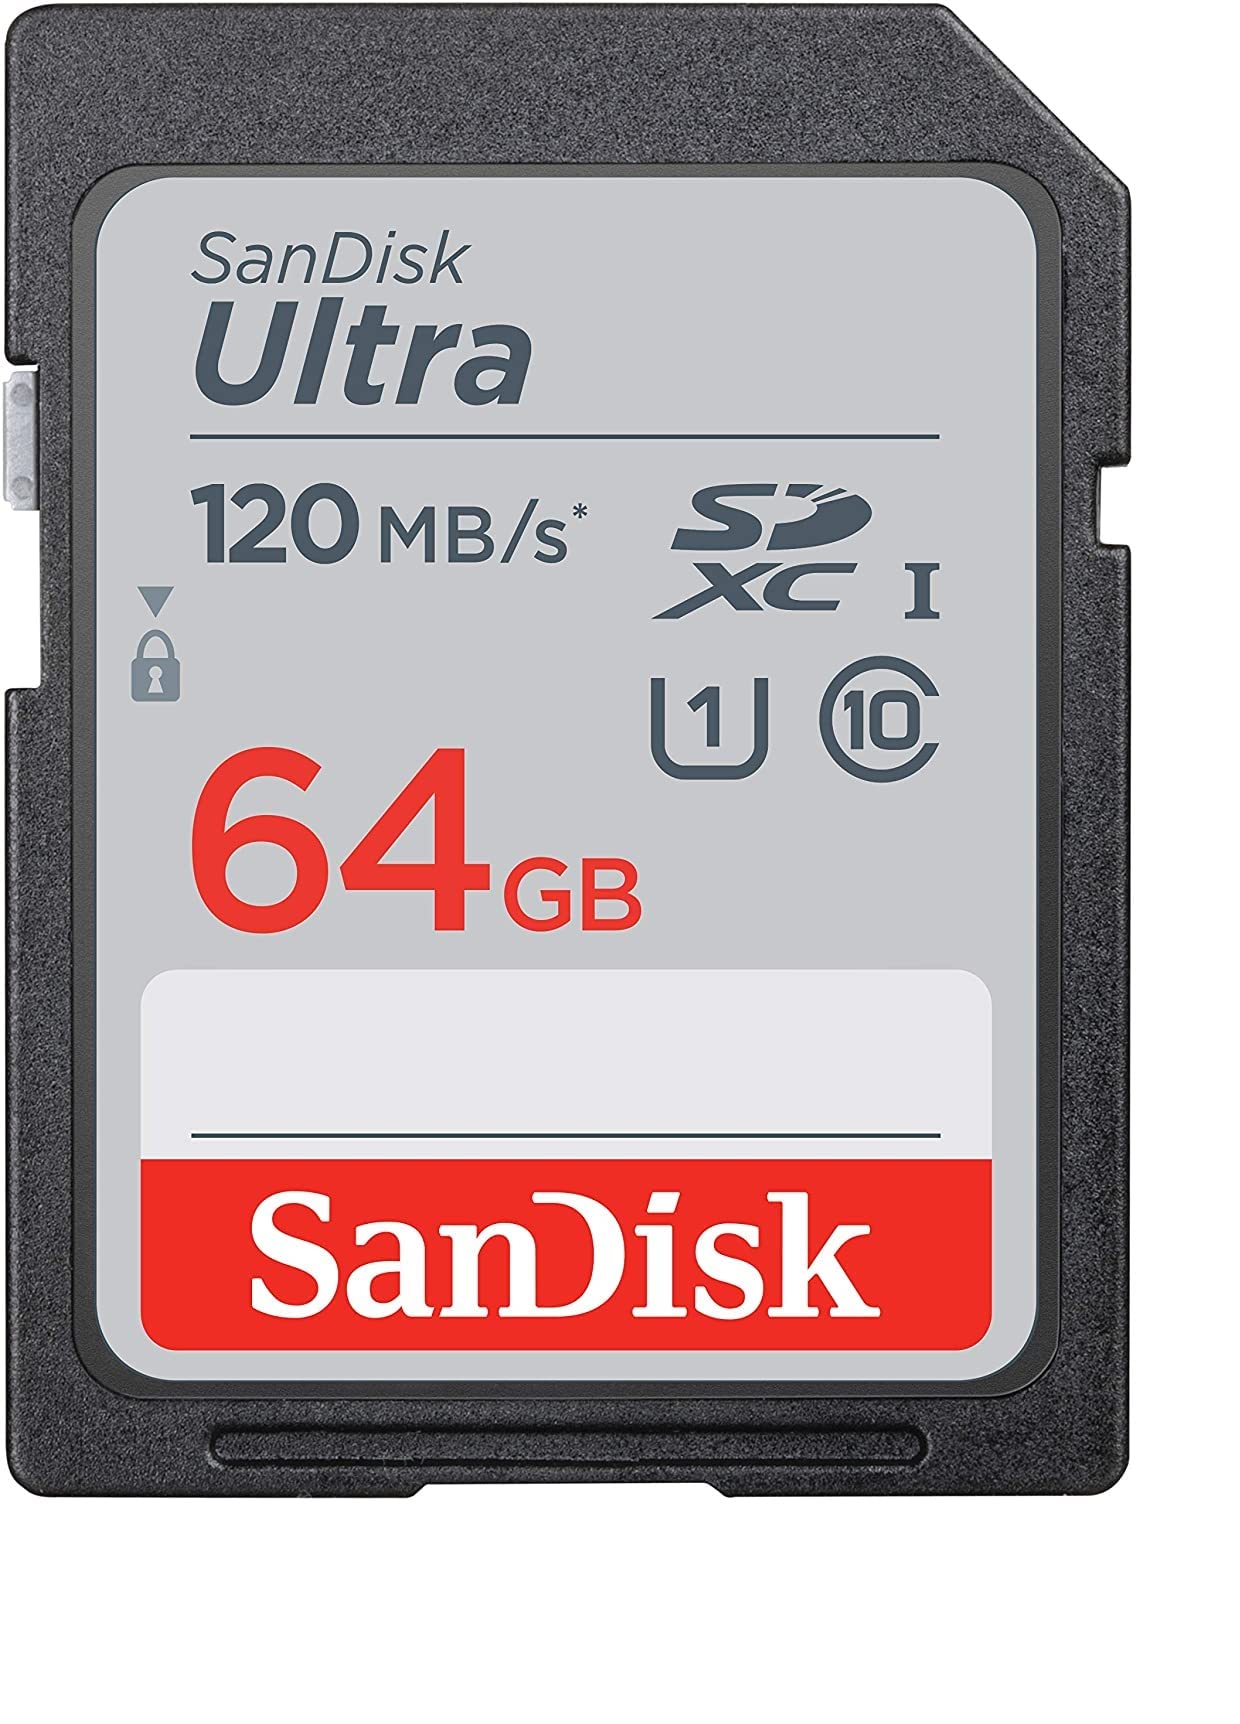 SanDisk 64GB SDXC SD Ultra Memory Card Works with Canon EOS Rebel T7, Rebel T6, 77D Digital Camera Class 10 (SDSDUN4-064G-GN6IN) Bundle with (1) Everything But Stromboli Combo Card Reader